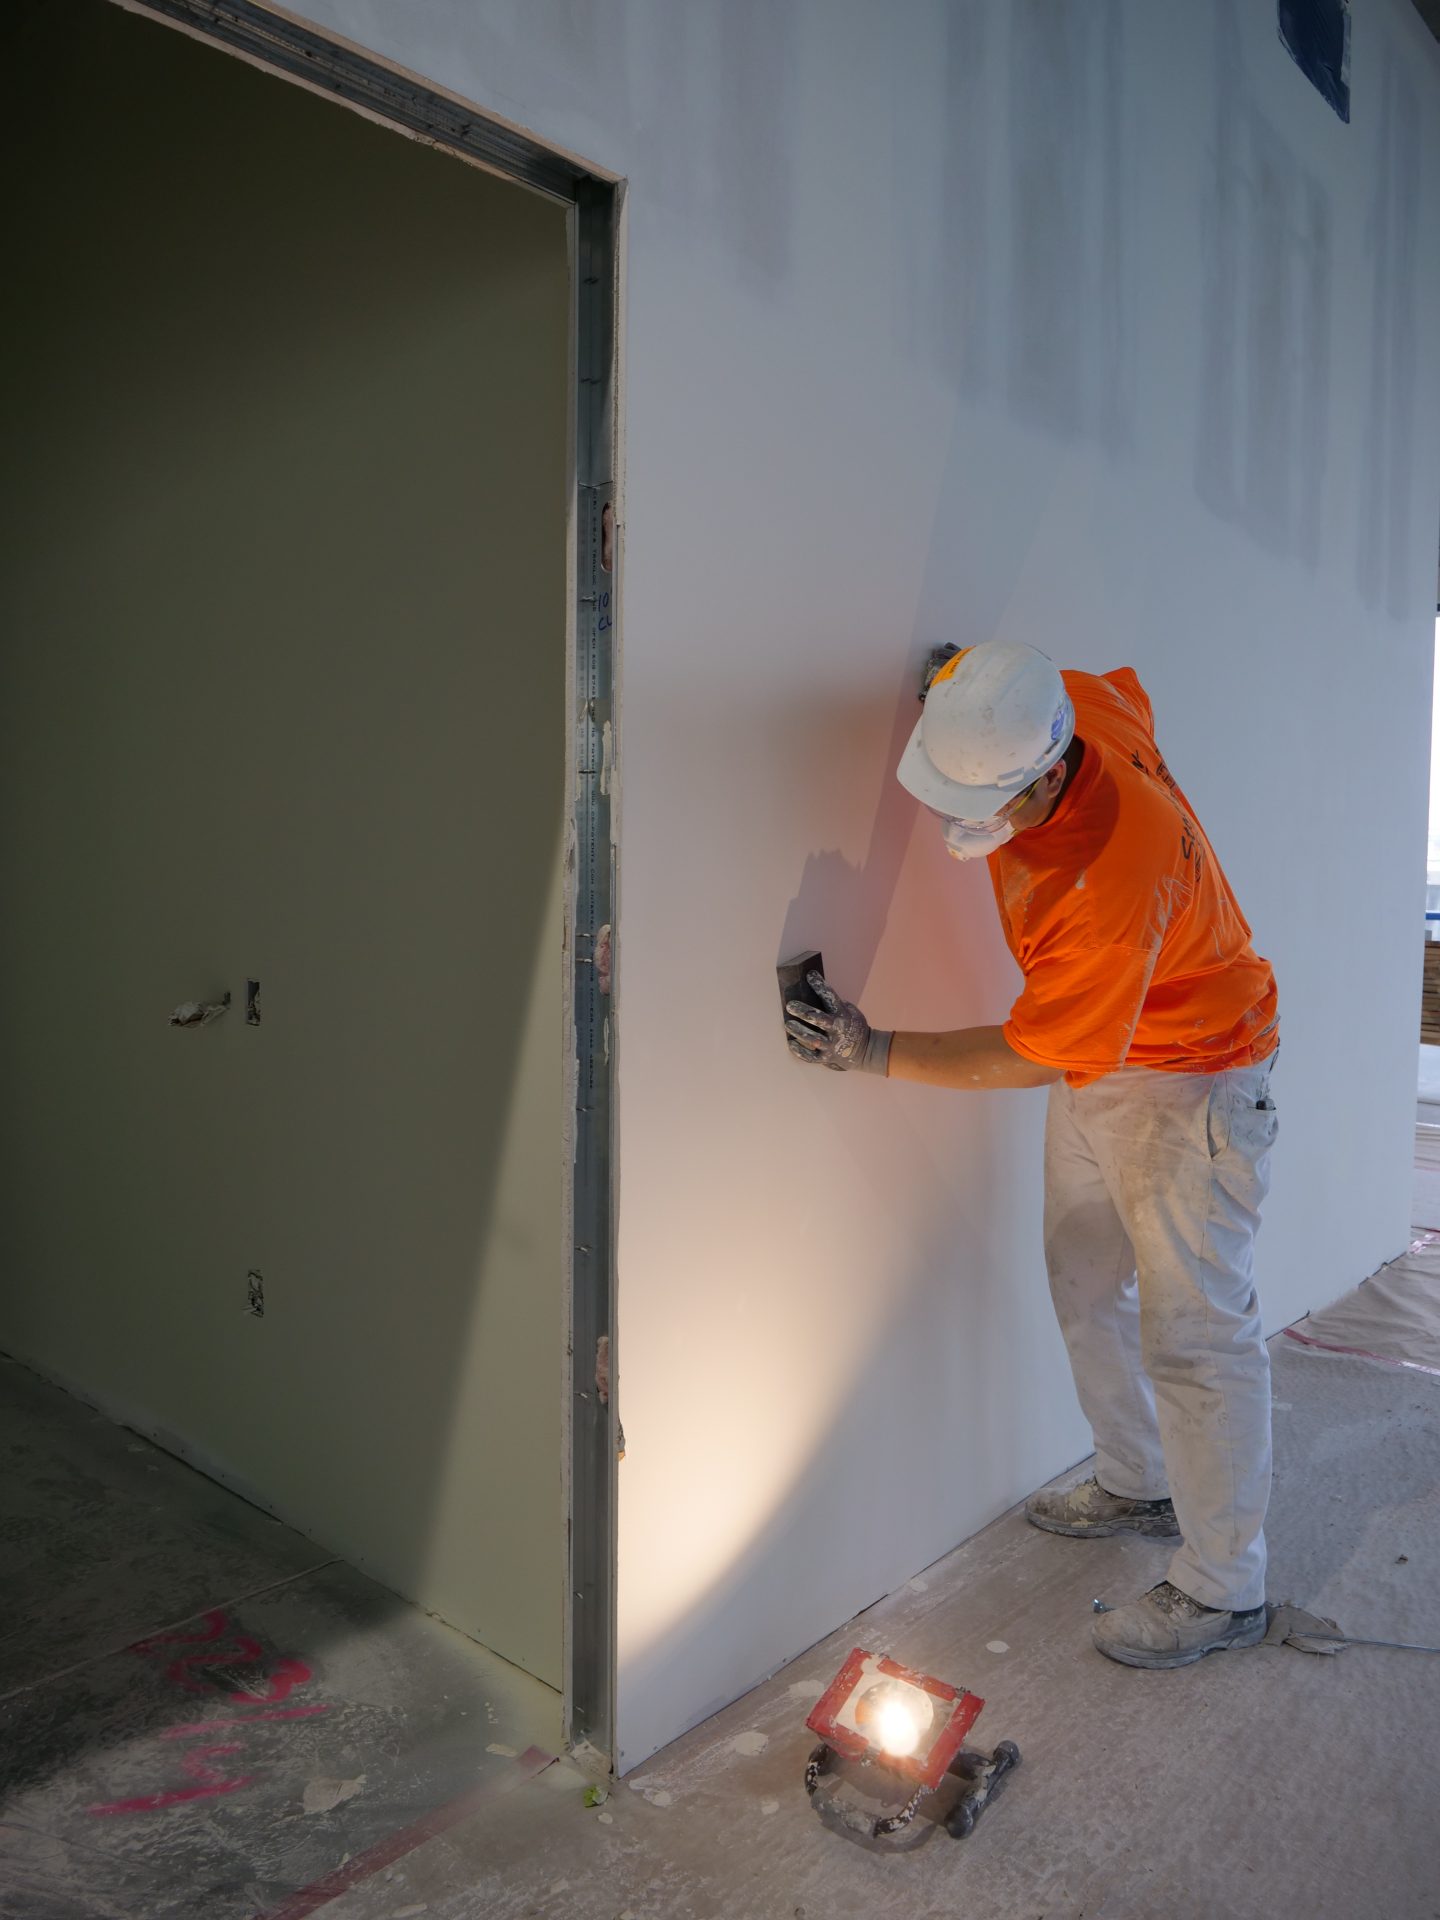 Image from the Gallery: Drywall Finishers 2019